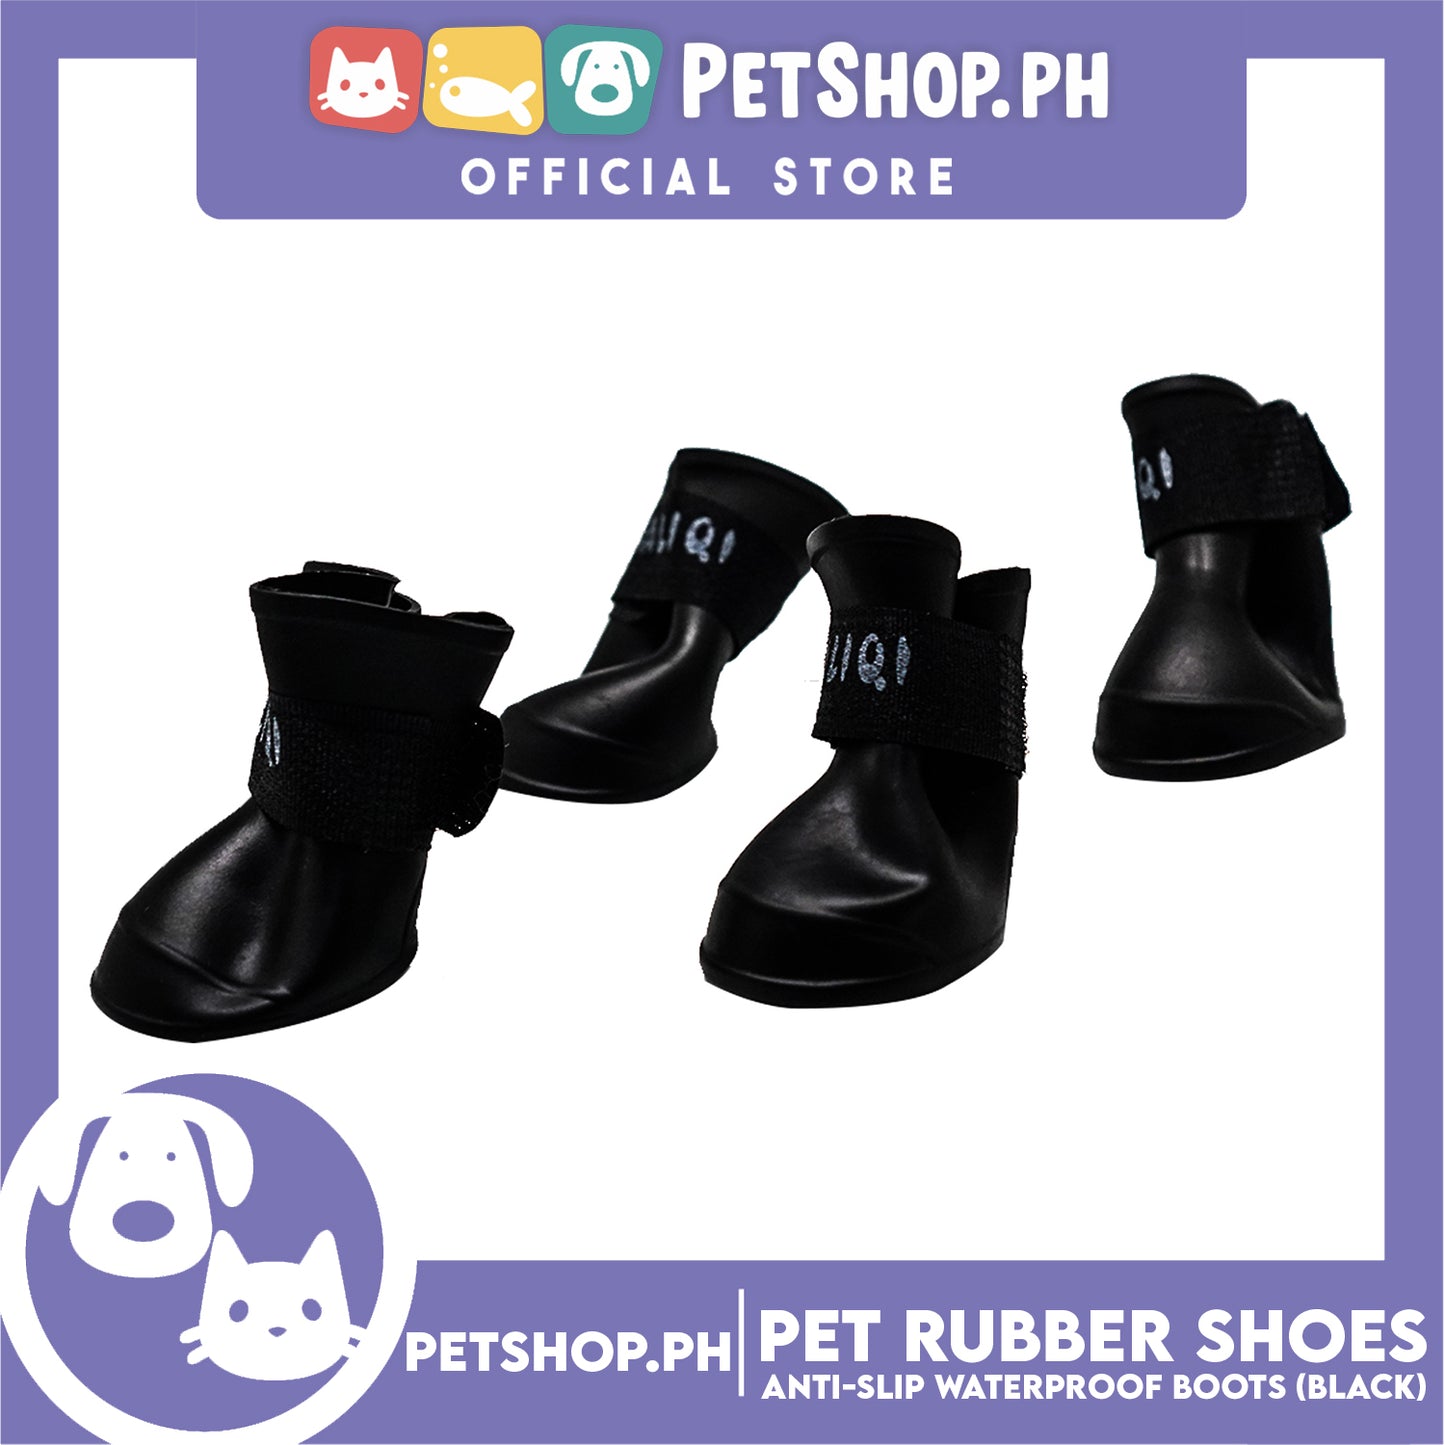 Pet Rubber Rain Shoes Anti-Slip Waterproof Rubber Boots with Paws Cover P6711 - Rubber Boots (Black)